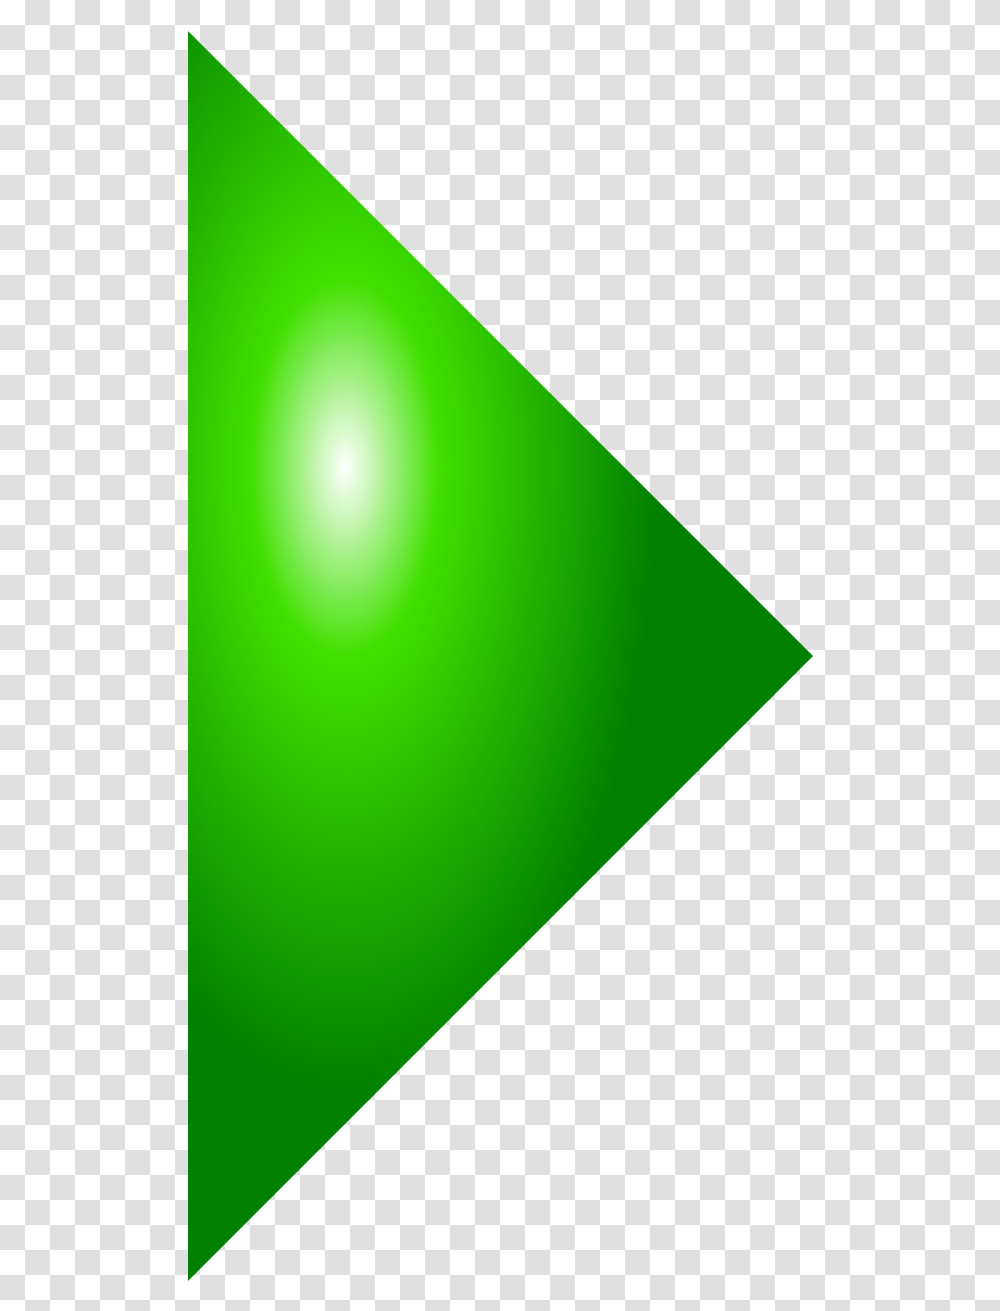 Green Arrow Filevector Right Arrow Changed Green Parallel, Lighting, Laser, Triangle, Spotlight Transparent Png